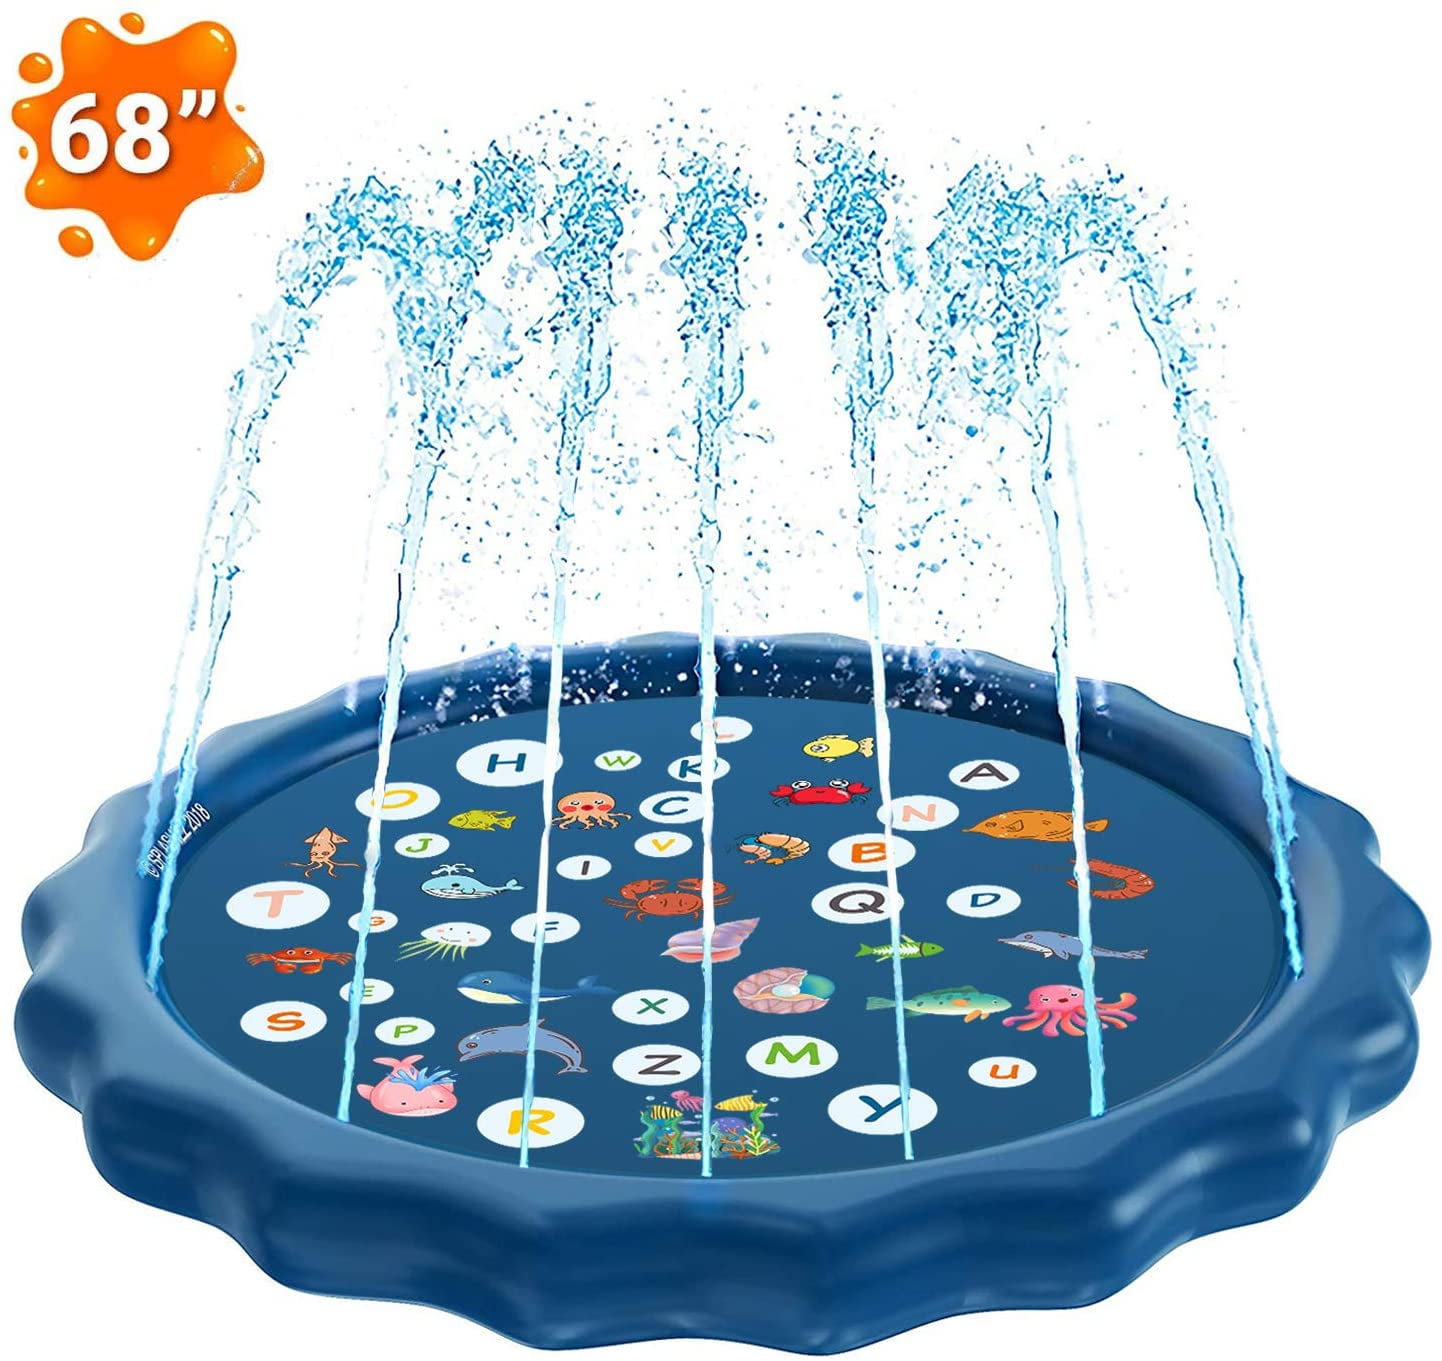 Blue Splash Play Mat,Toddler Kids Sprinkler Pad 170cm/67 Inflatable Water Play Pad Outdoor Water Play Sprinklers Kids Numbers/Shapes/Animals Early Learning Games and Toys Garden/Yard/Beach Fun